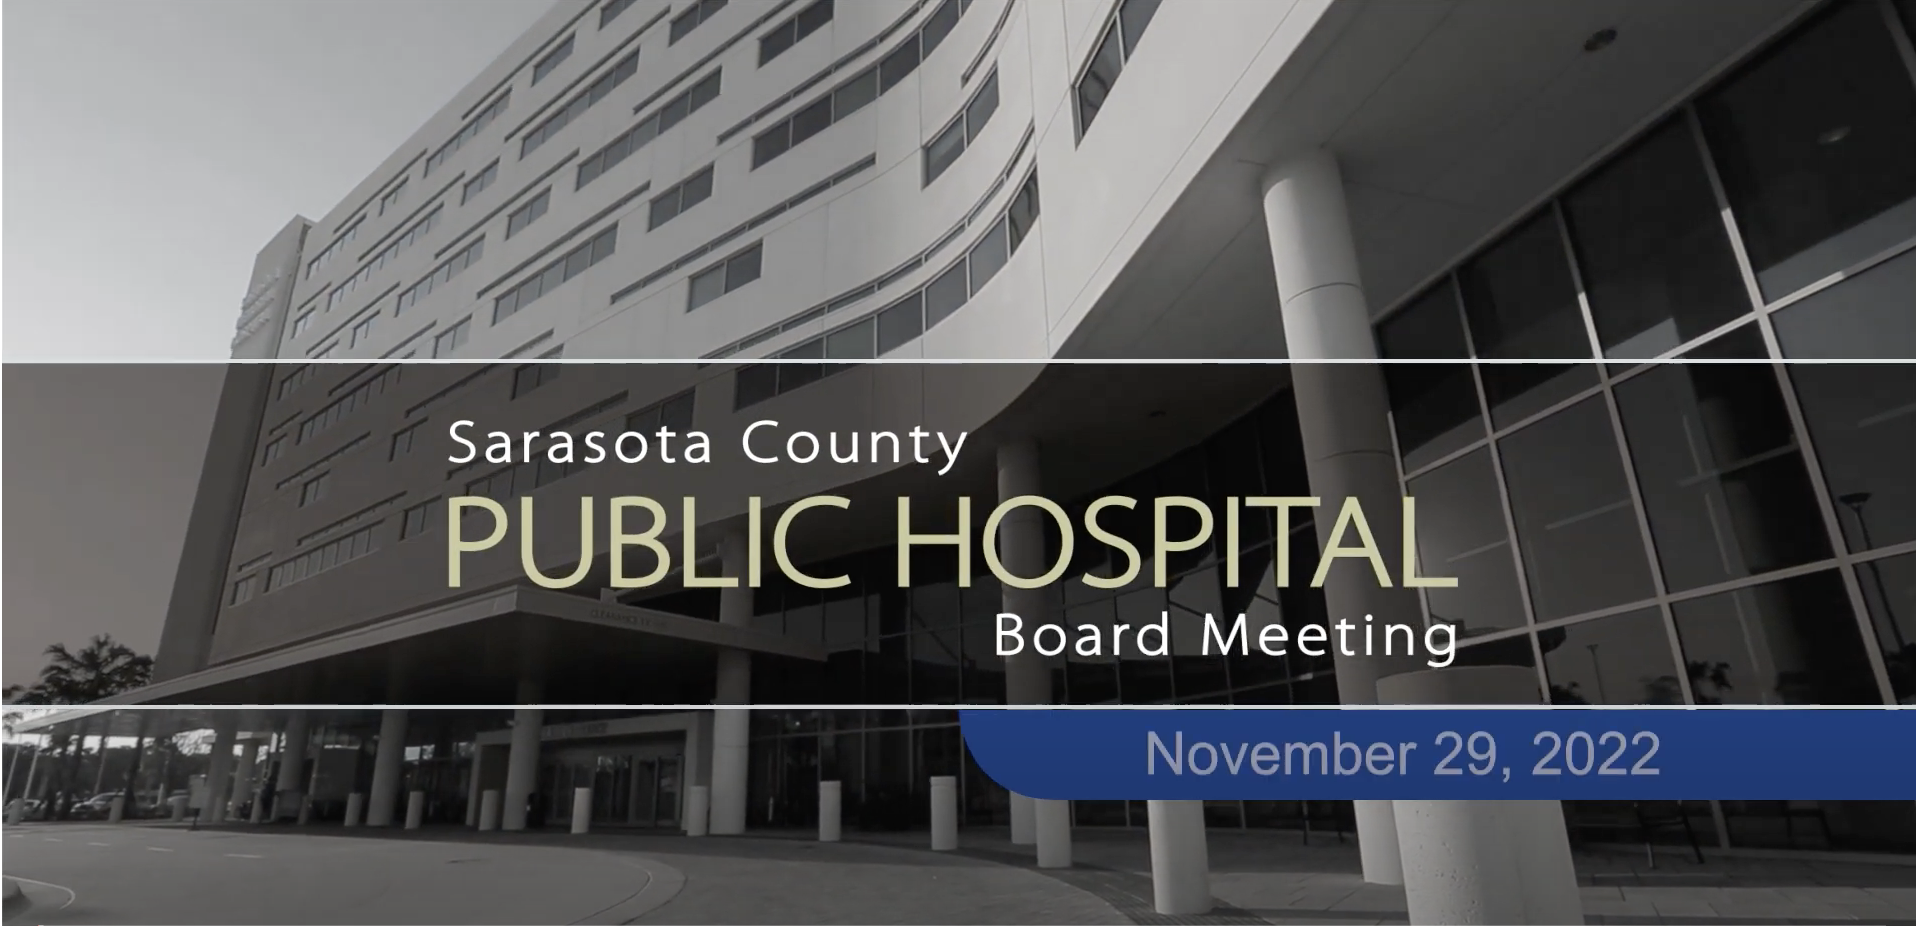 Hospital Board Names New Officers